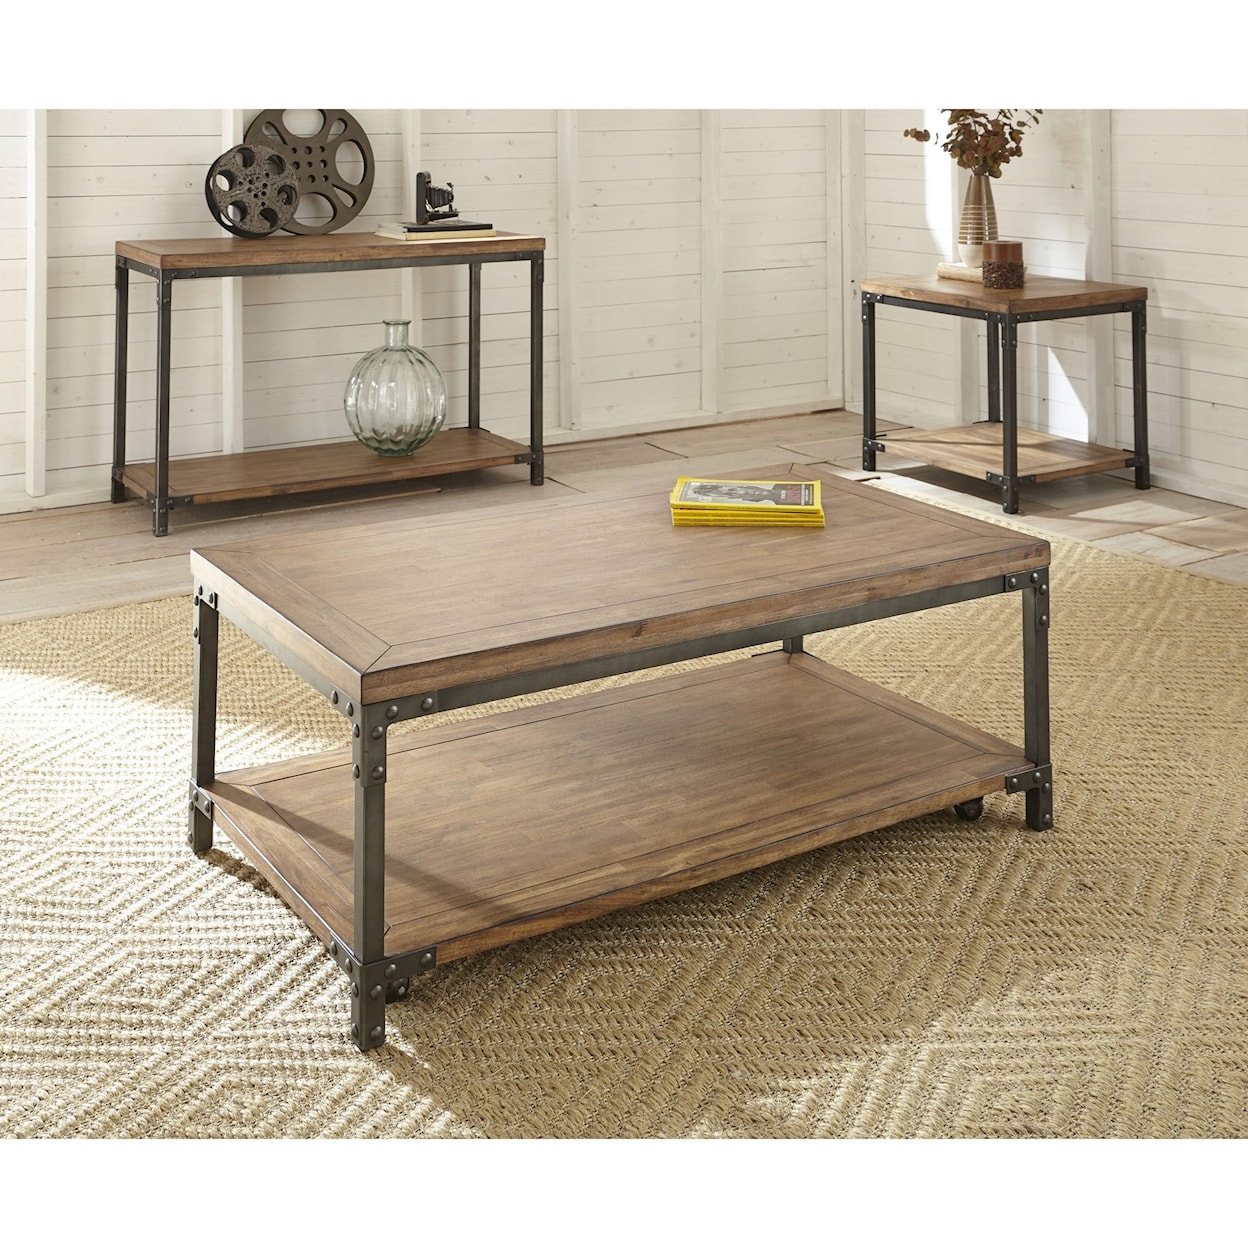 Prime Lantana Cocktail Table with Casters